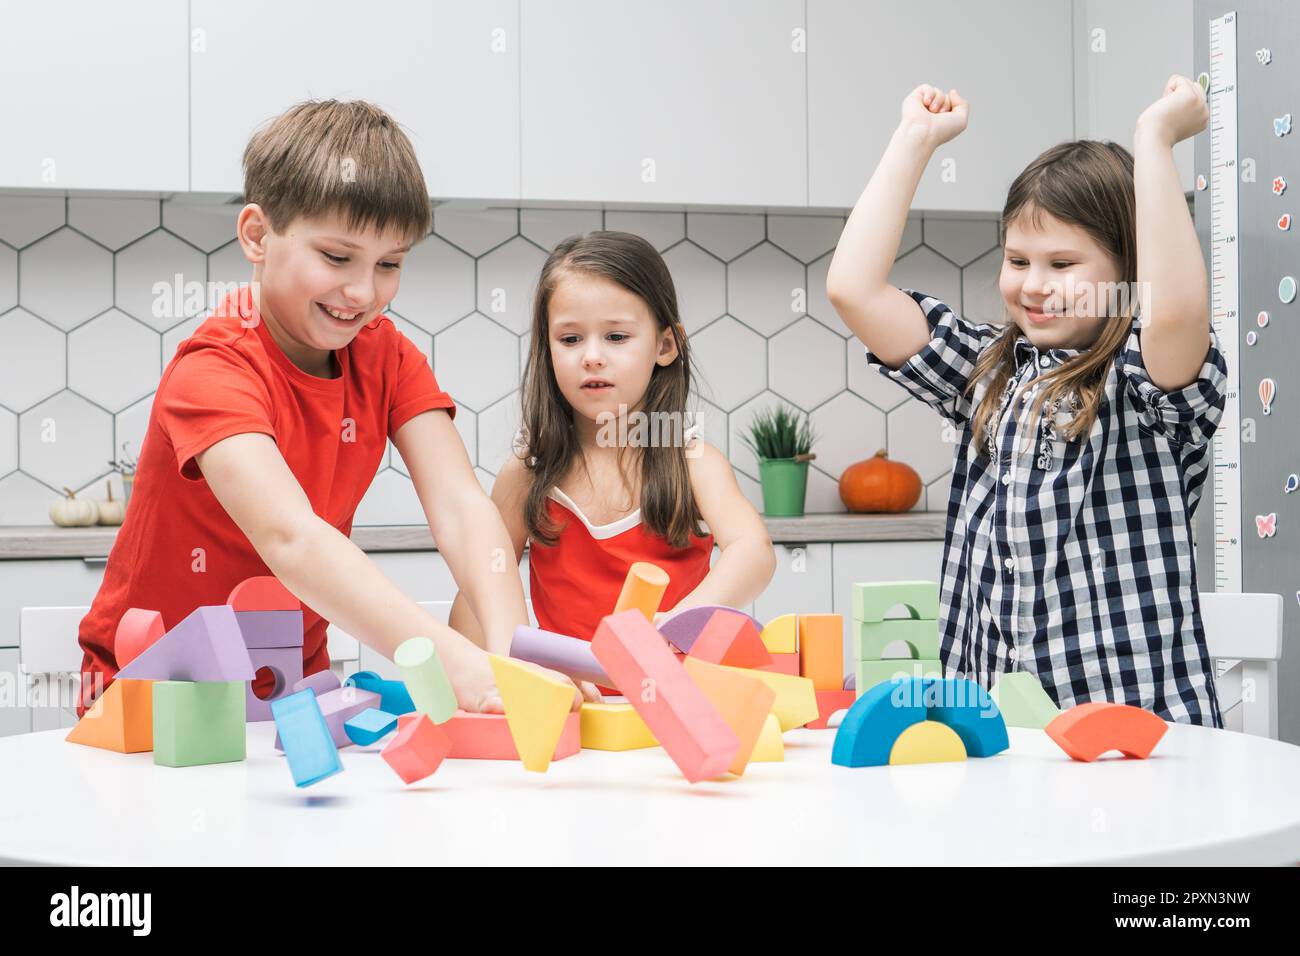 Portrait of happy preteen children friends sitting at table in kitchen, breaking tower house castle of colorful wooden construction blocks geometric f Stock Photo